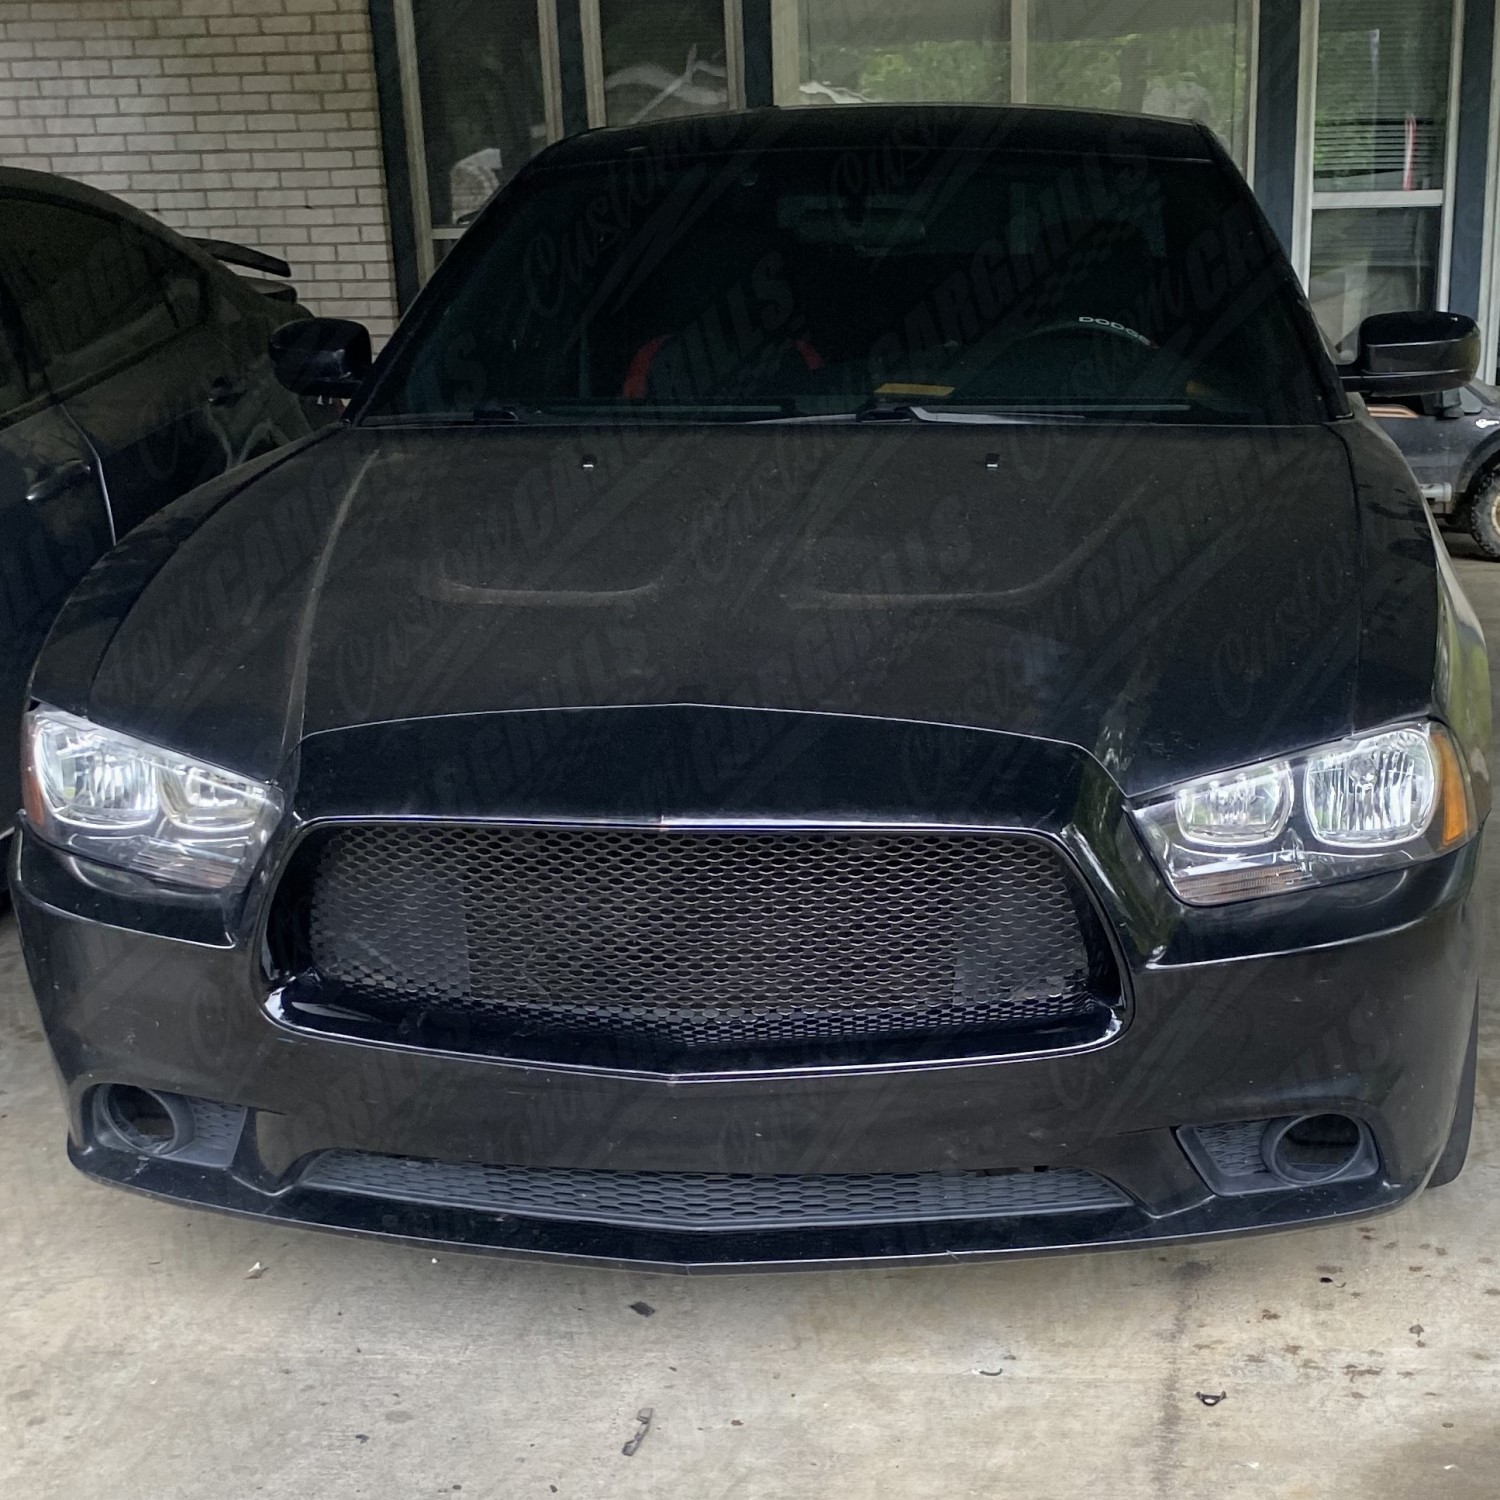 Upgrade Your Dodge Charger with a Sleek Deep Dish Custom Grille featuring Perf GT mesh